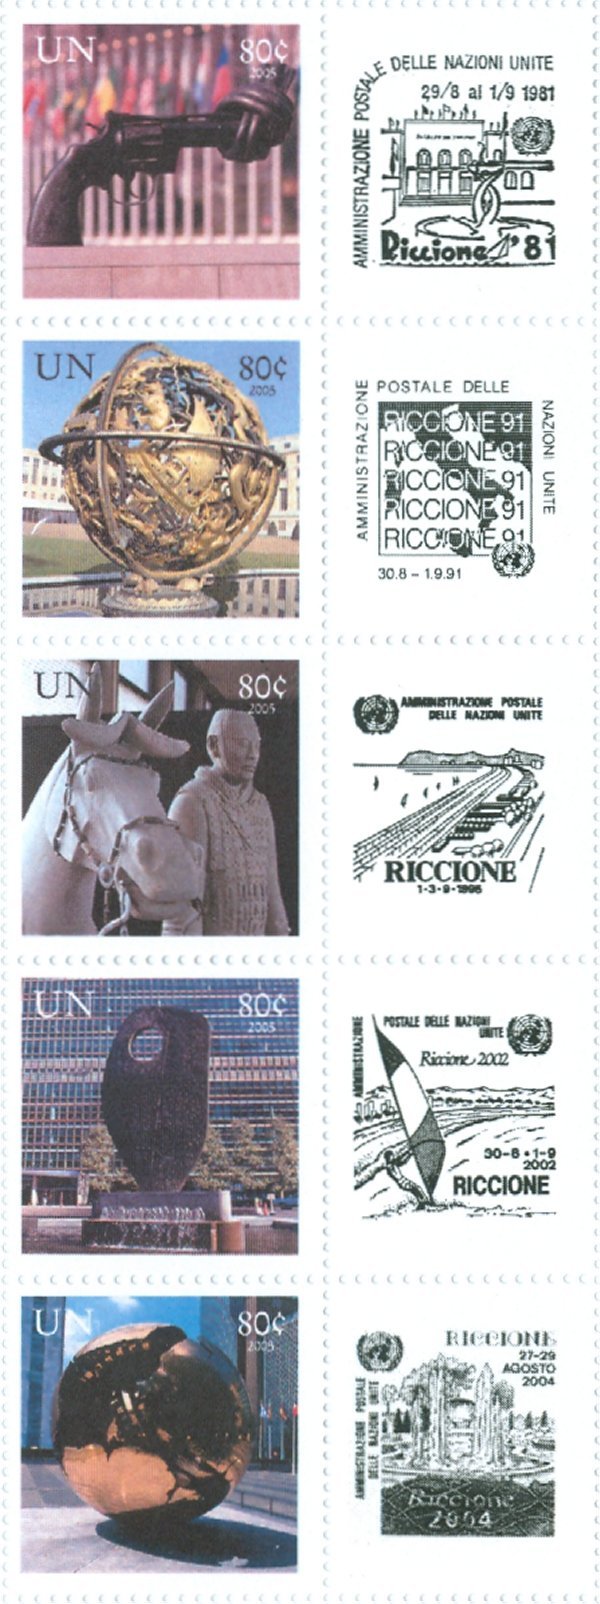 UNNY 880-84r 80c Pers. Stamps strip of 5 from Riccione Sheet #unny880r5